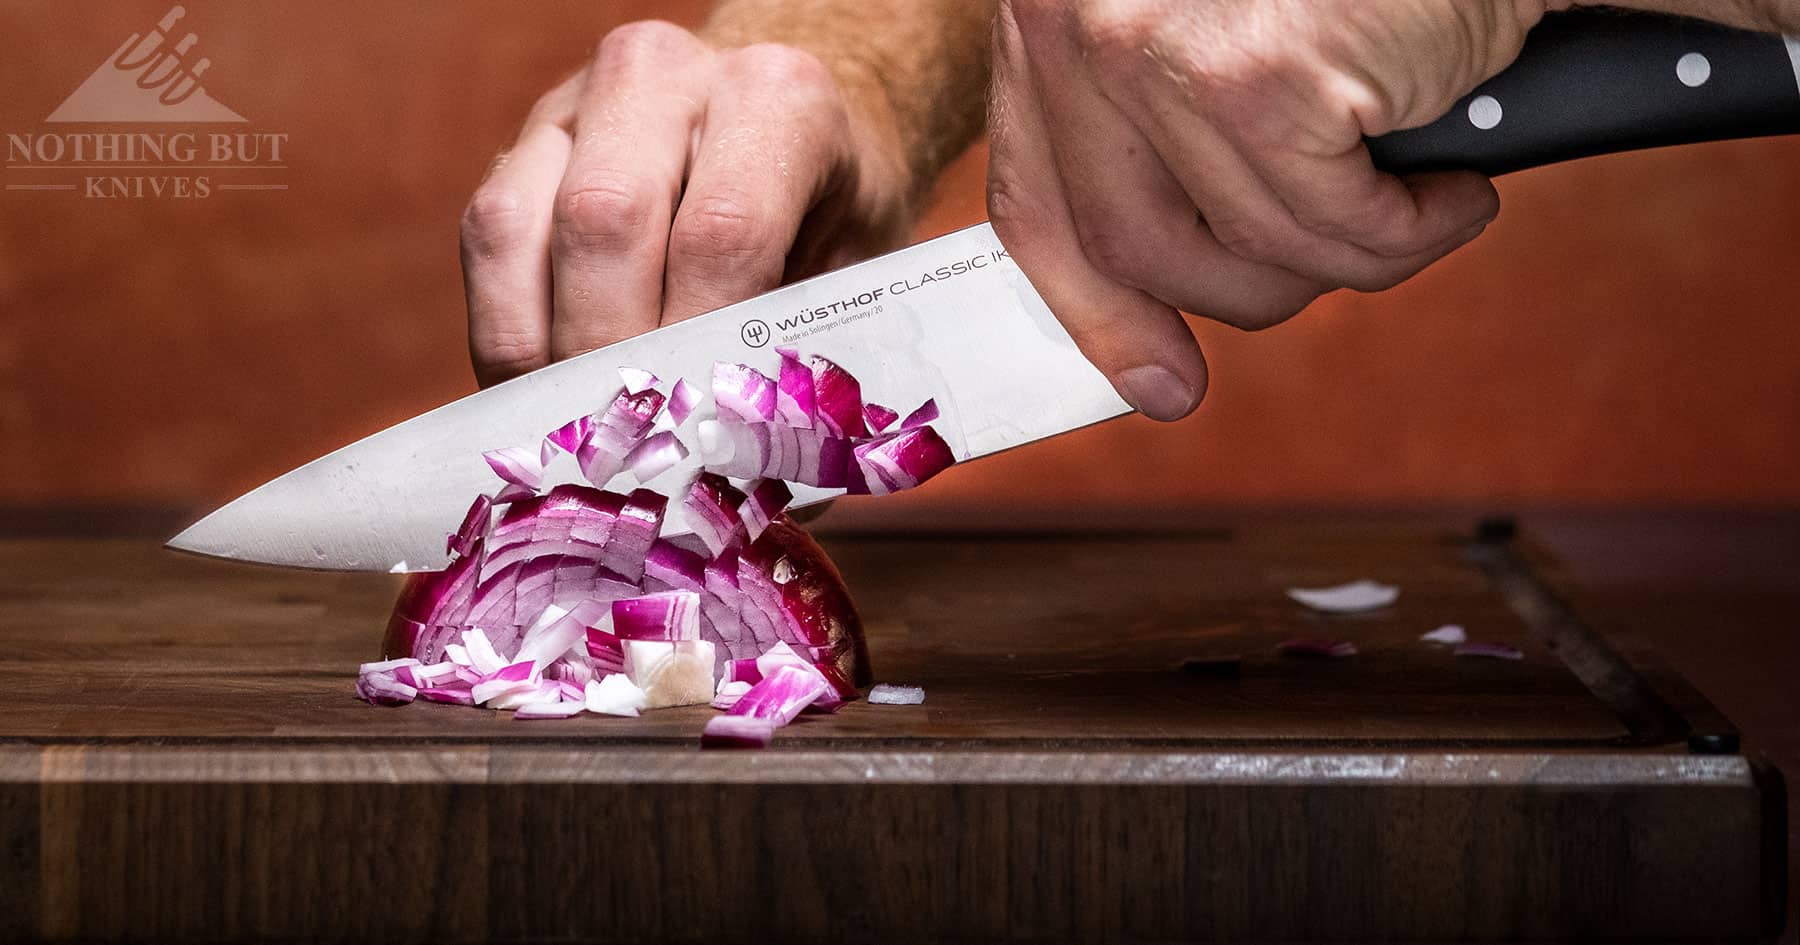 The Classic Ikon chef knife does a great job with food prep. 